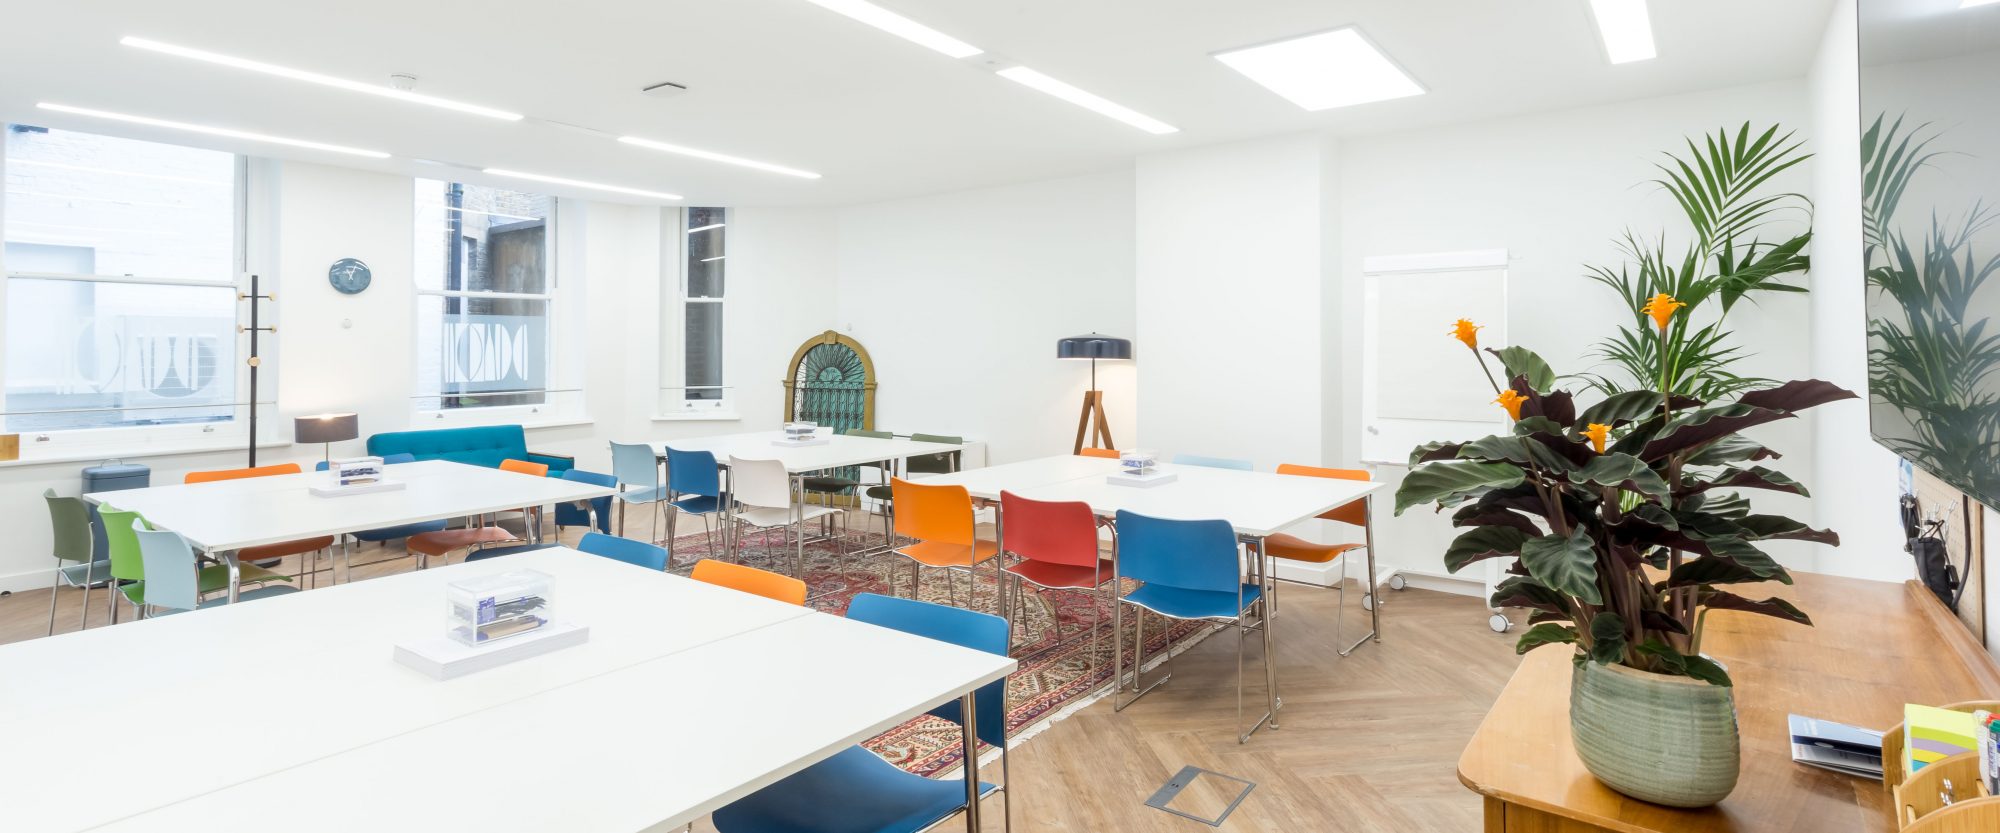 central london meeting rooms for hire